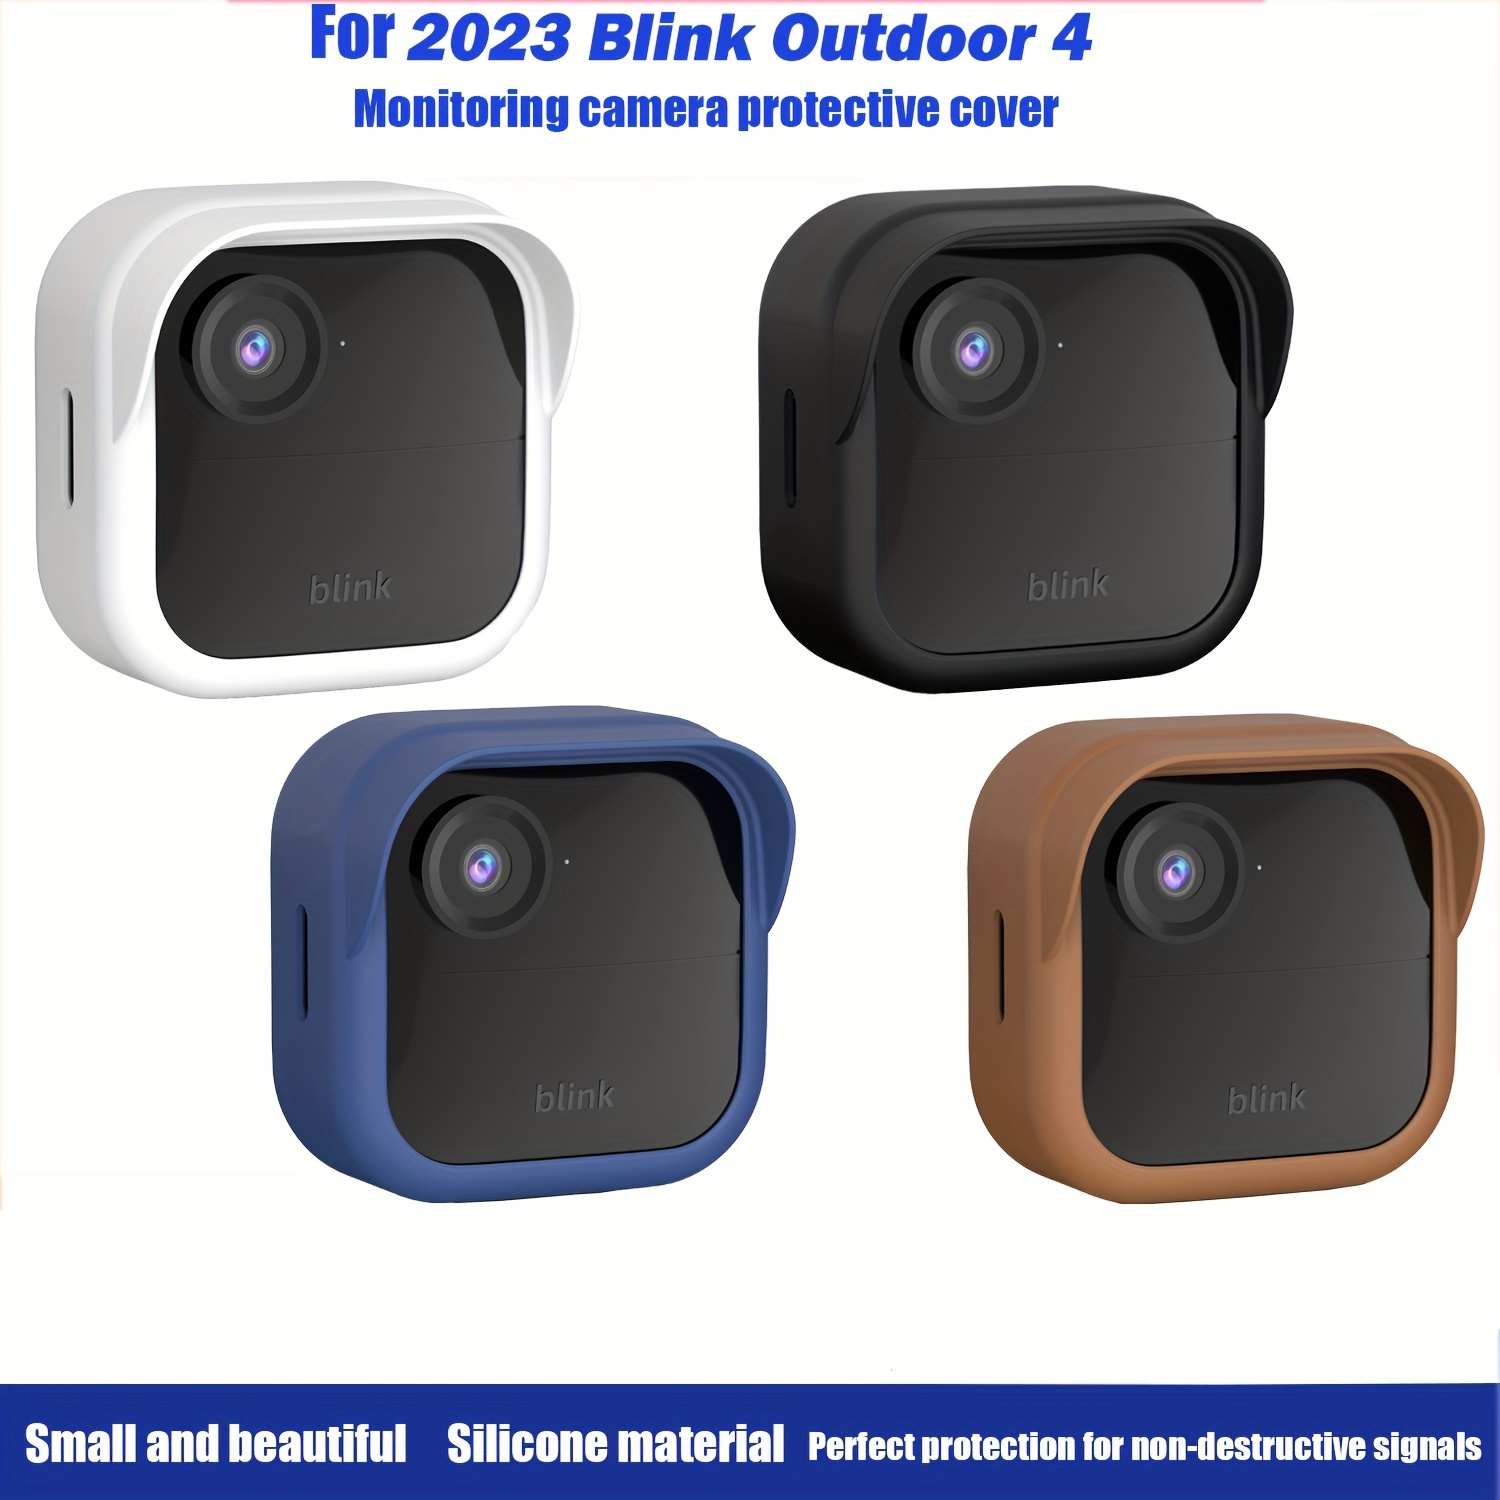 Suitable For Blink Outdoor 4 Monitoring Camera Silicone Protective Case  Monitoring Case Waterproof And Dustproof Cover (Note: Only Silicone  Protective